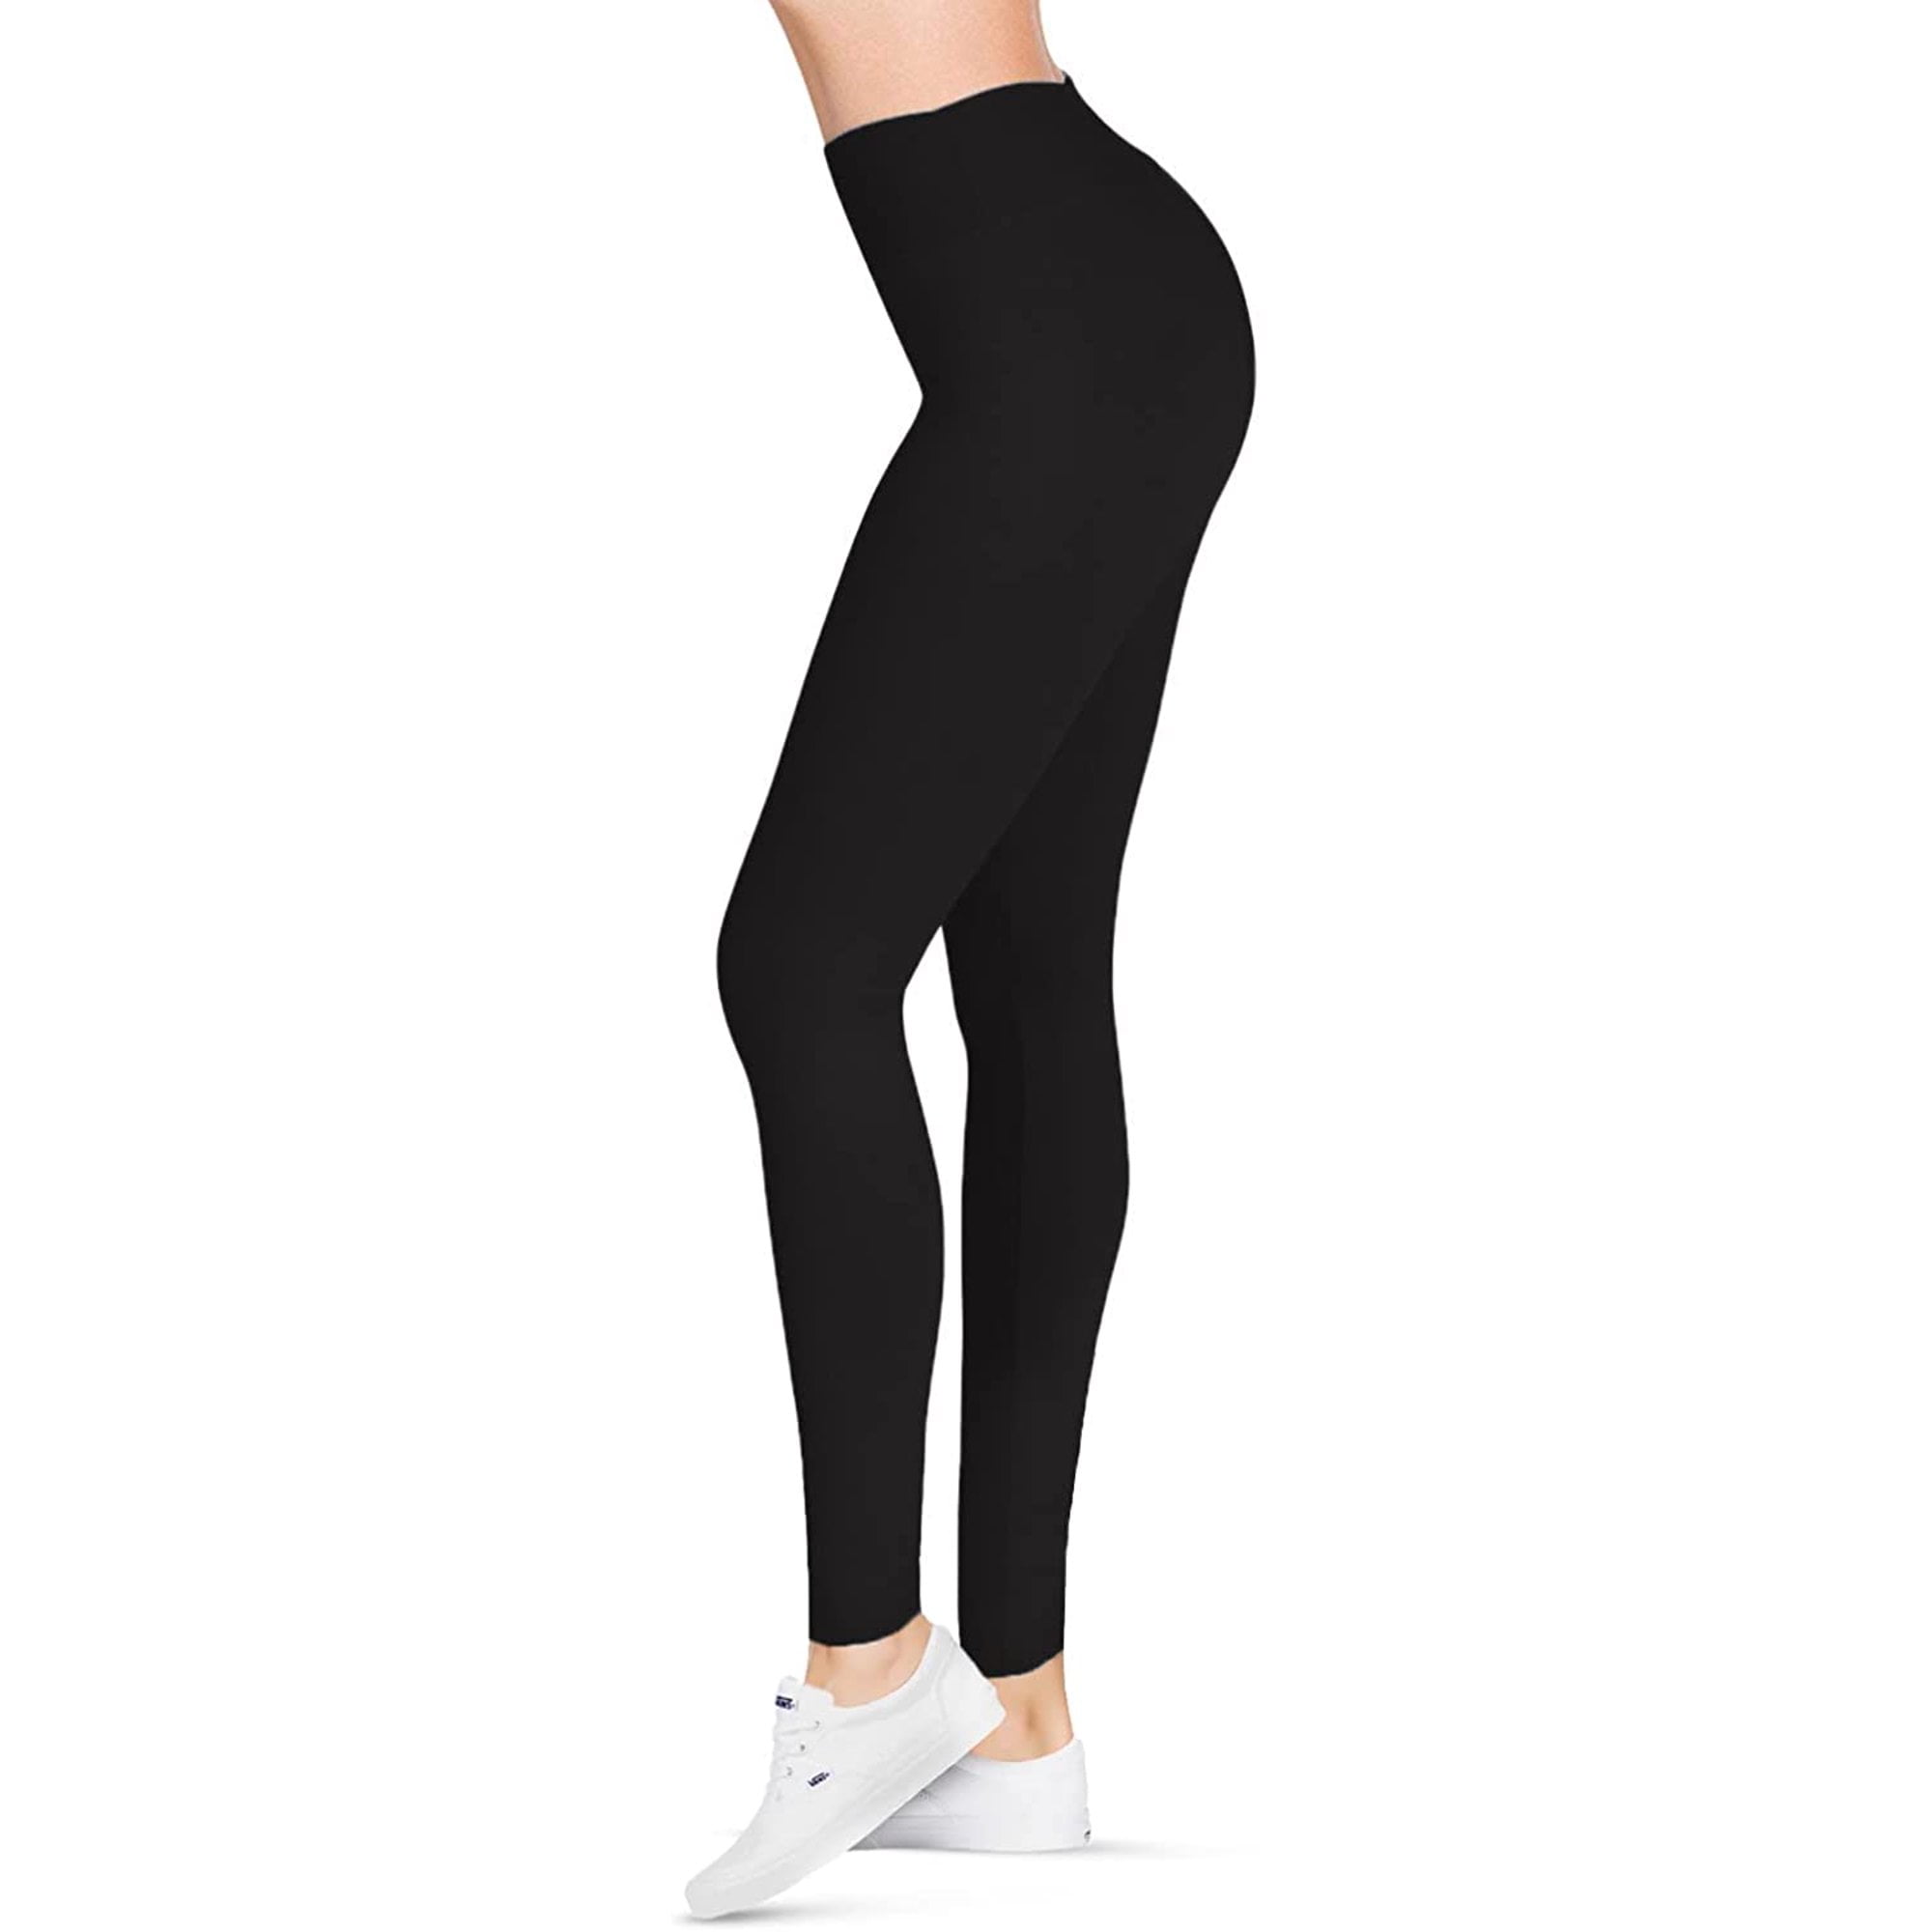 SATINA Womens High Waisted Capri Leggings for Women - Capri Leggings Pants  for Tummy Control, Yoga, 3 Inch Waistband, Black, One Size at  Women's  Clothing store